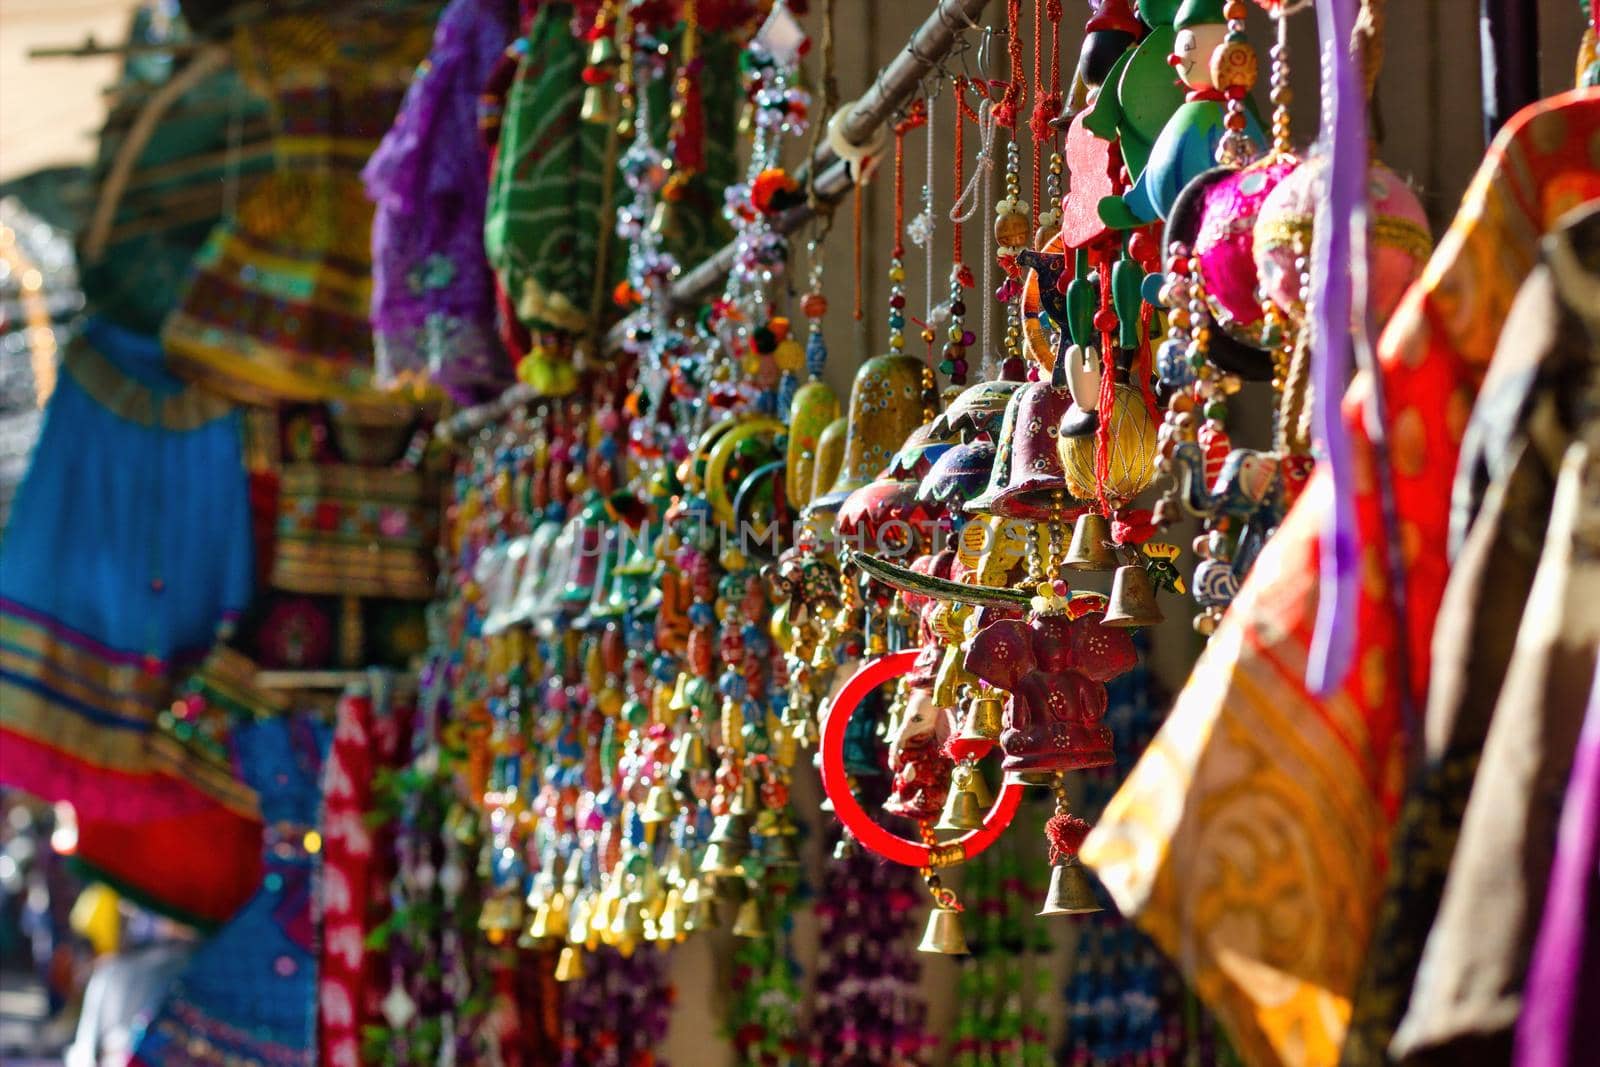 Bunch of colorful decorative item as souvenir being hanging as display for sale in the commercial street of pushkar fair in the state of Rajasthan by arpanbhatia